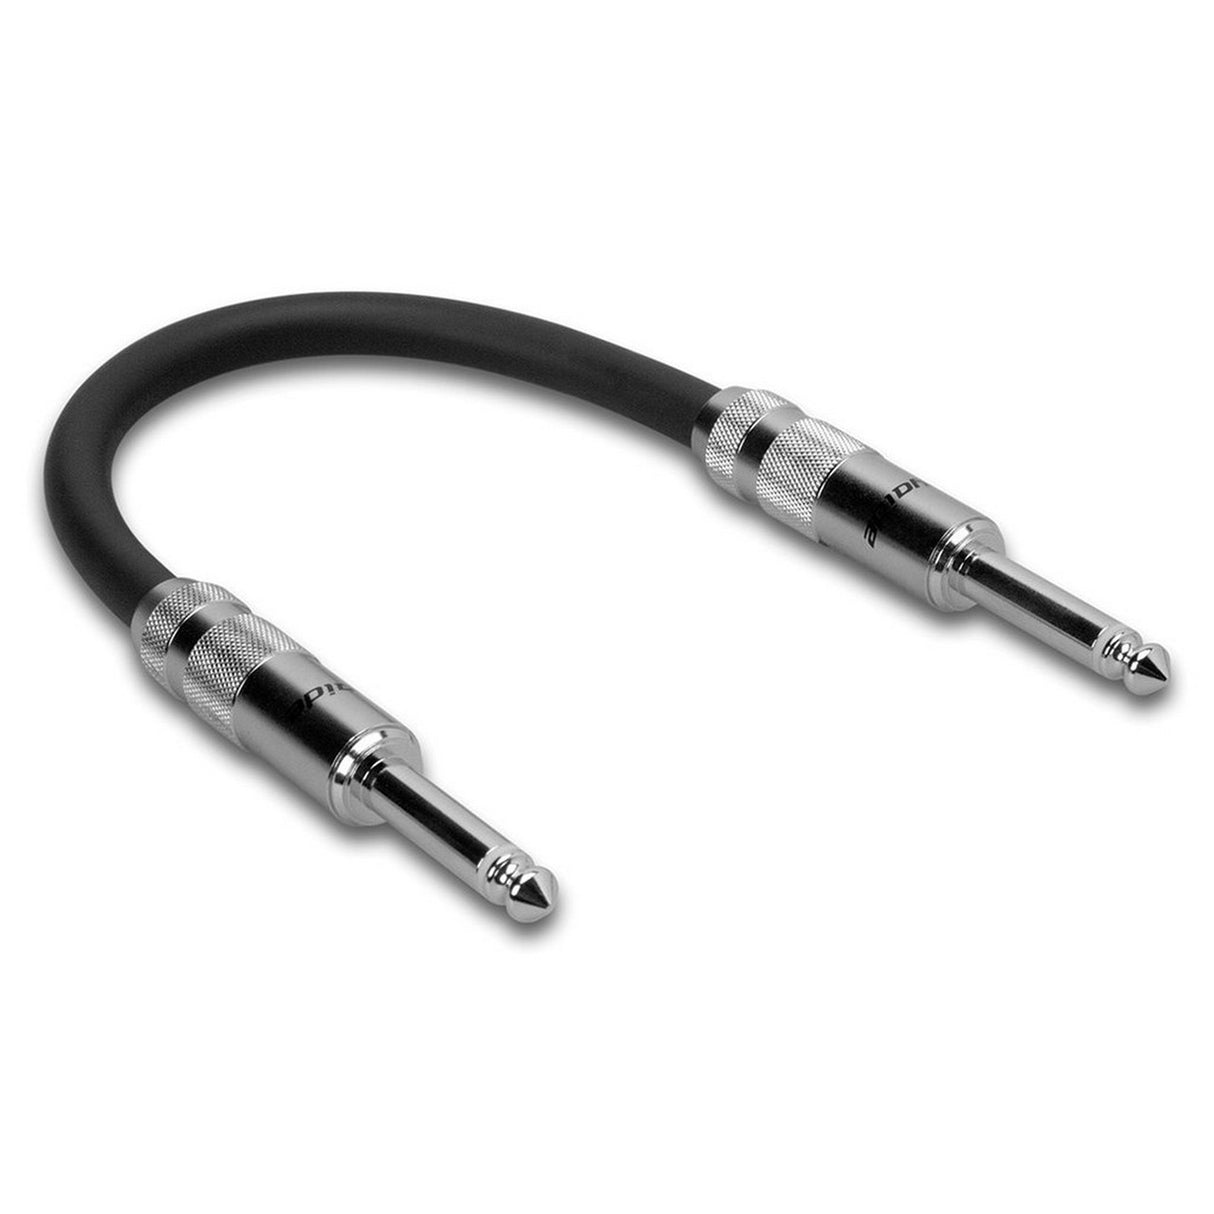 Zaolla ZGT-000.5 | 6 Inch Guitar Patch Cable Oyaide Straight to Same Cable